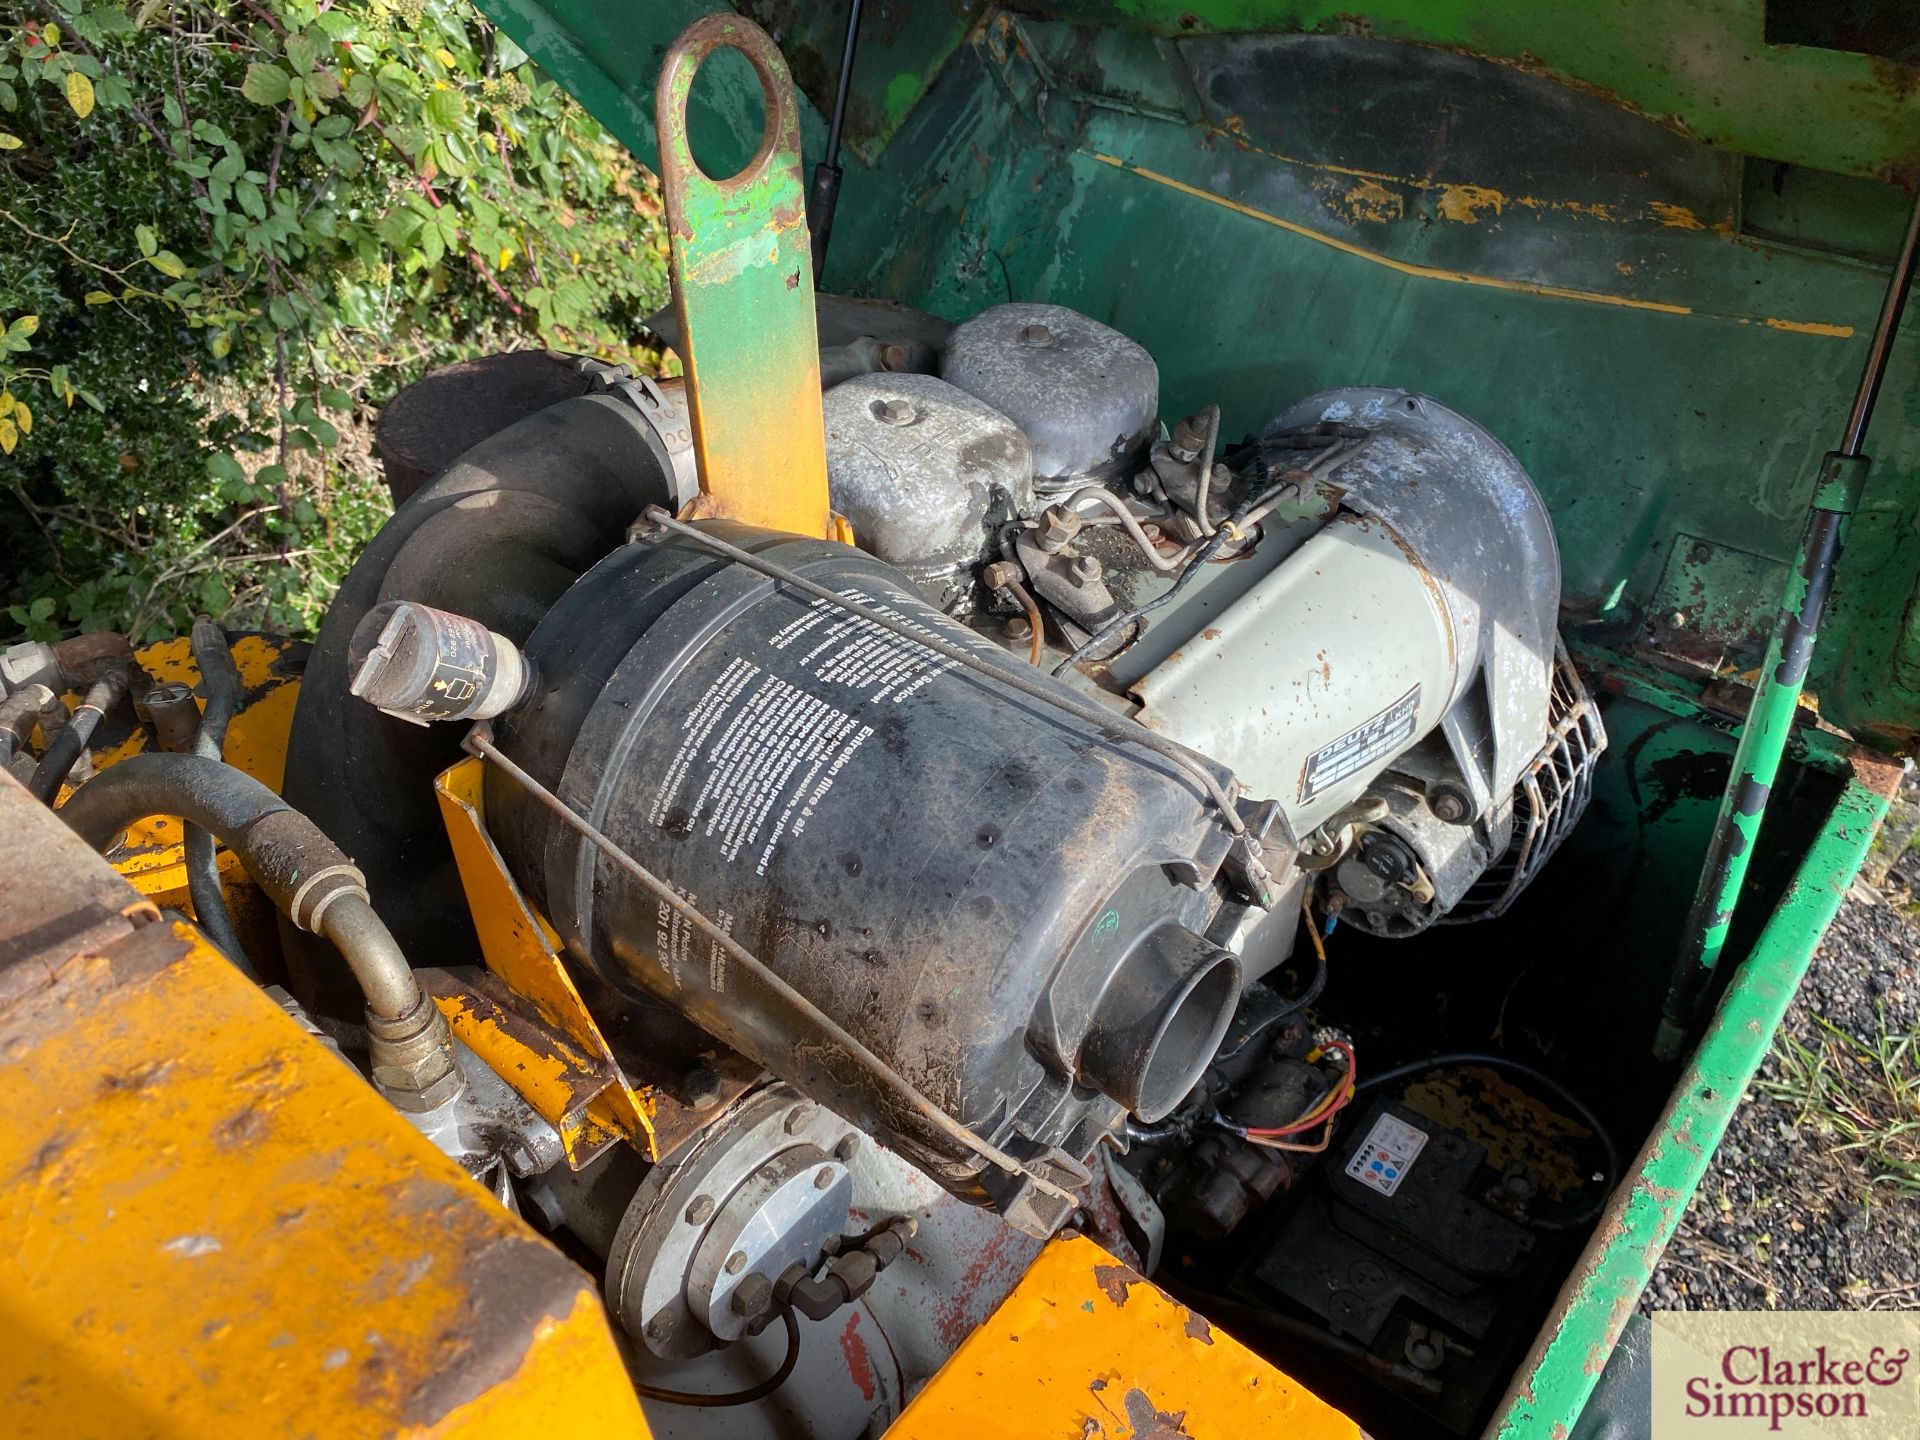 Ingersoll Rand road tow compressor. With air tools and hose. - Image 6 of 9